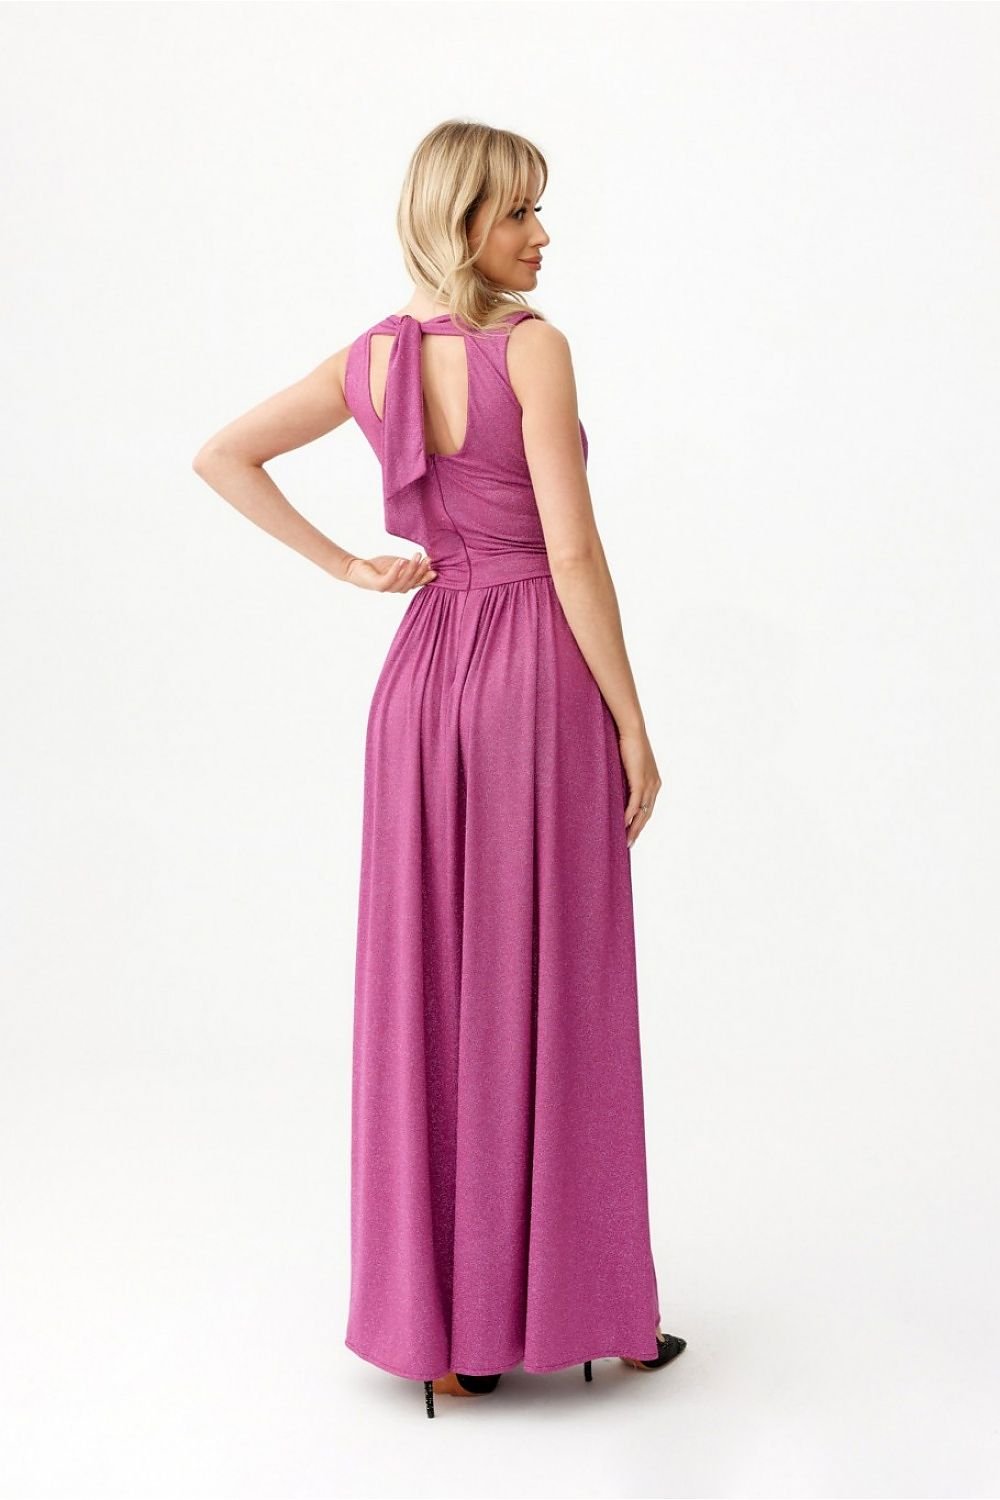 Brocade Violet Long Maxi Dress With A Tie Sleeveless Evening Dresses